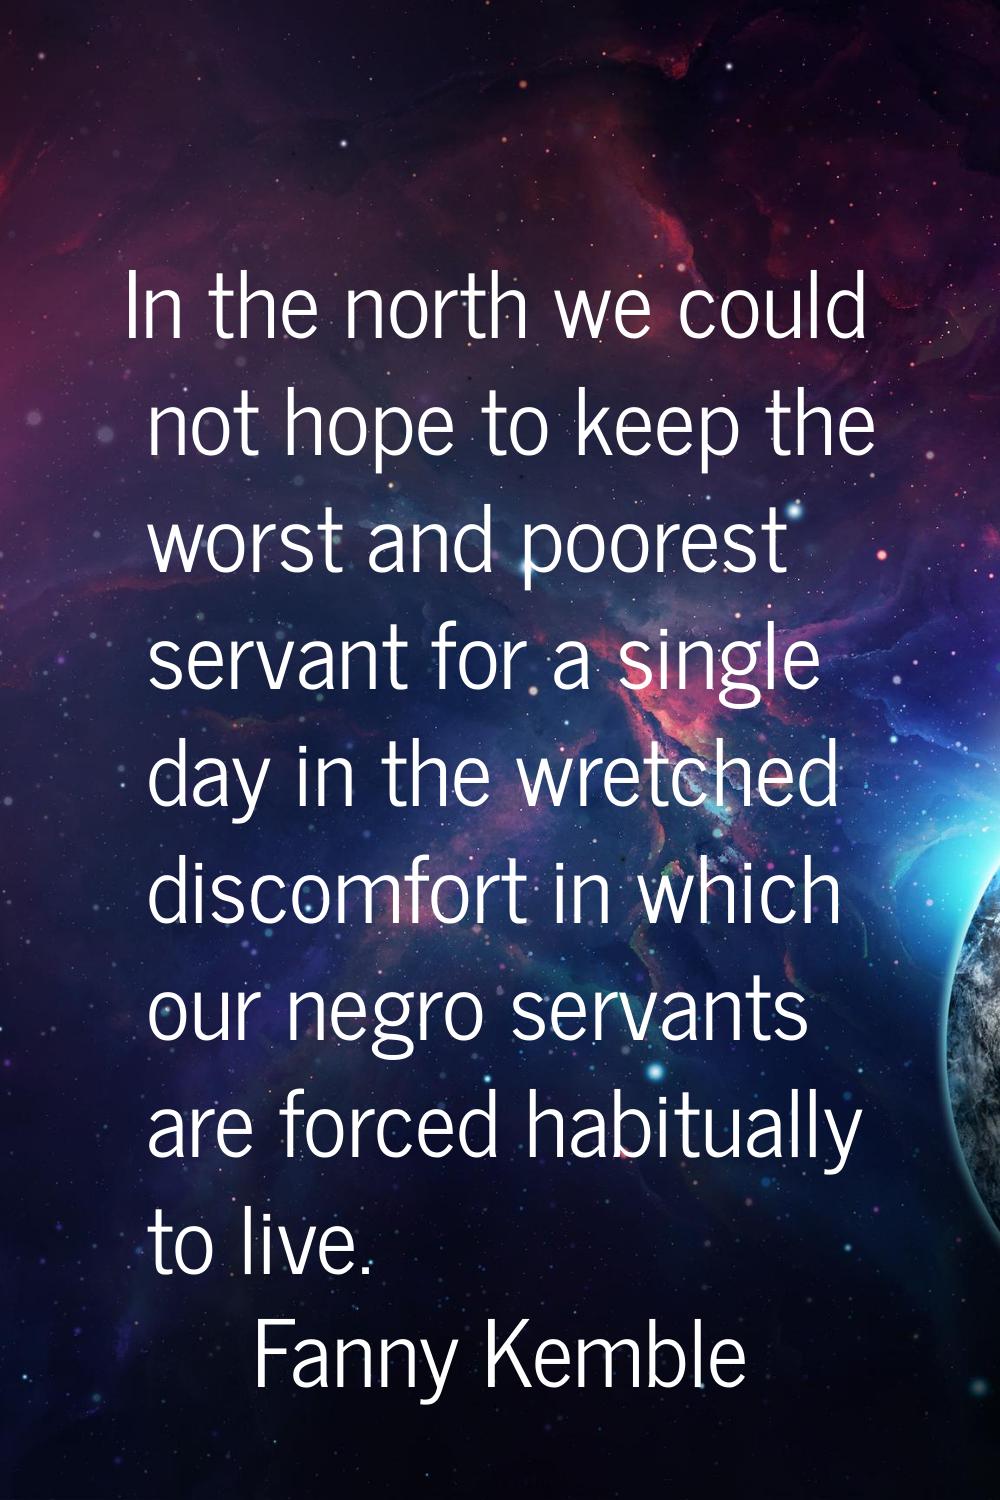 In the north we could not hope to keep the worst and poorest servant for a single day in the wretch